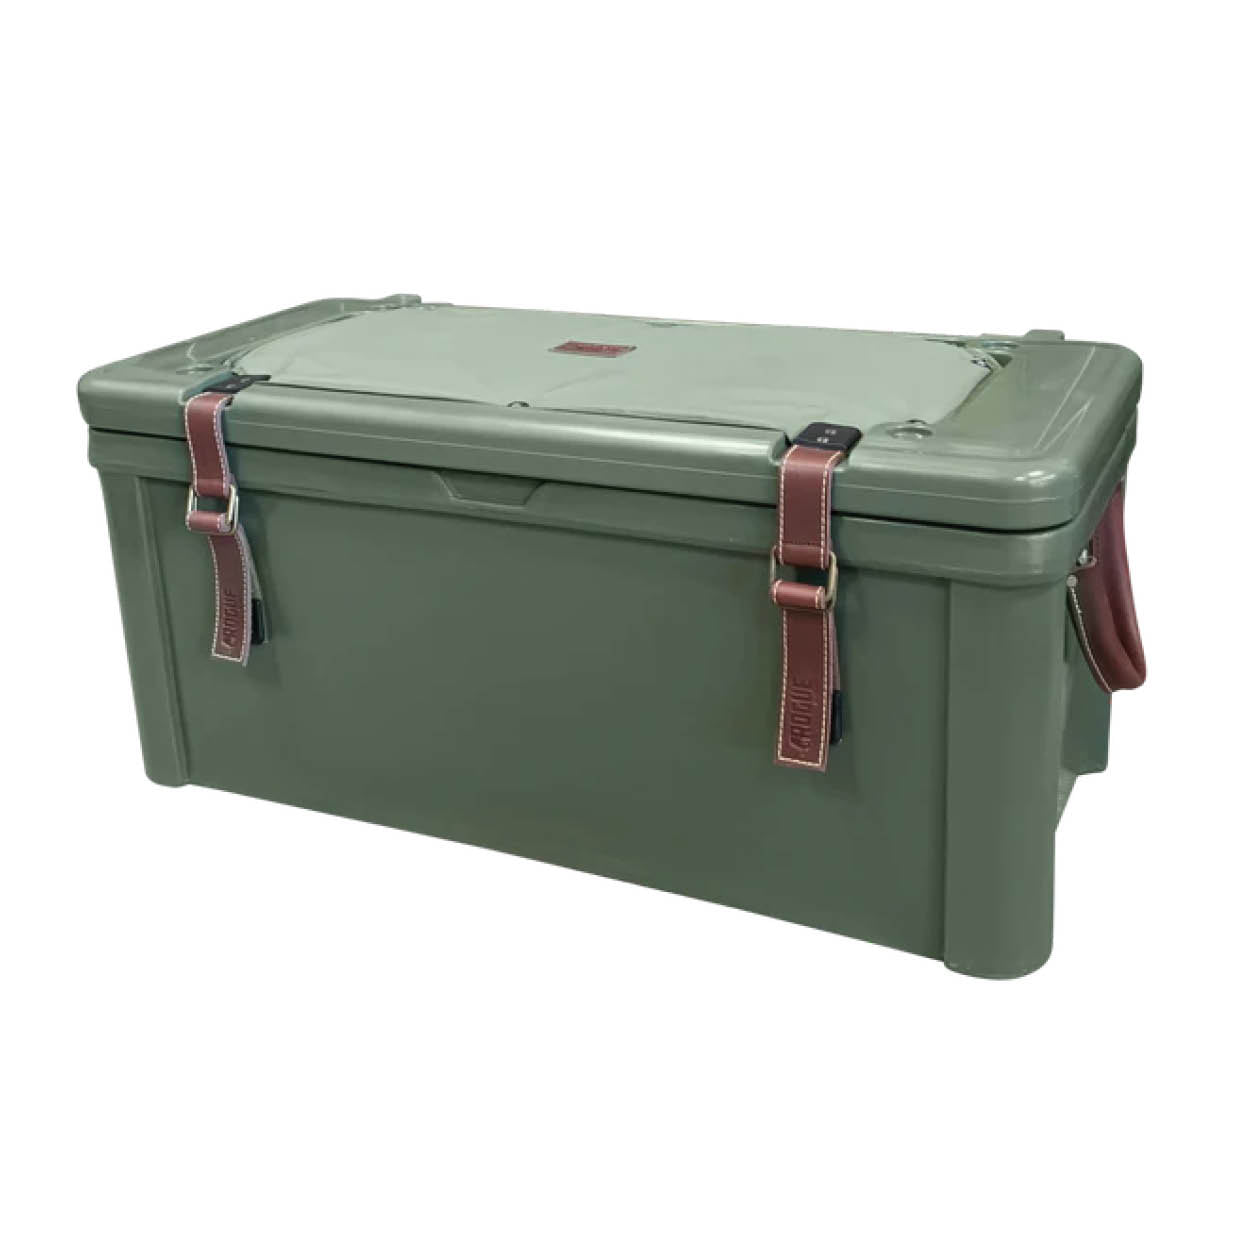 Rogue Ice Cooler 75L - Canvas seat cover and leather fittings